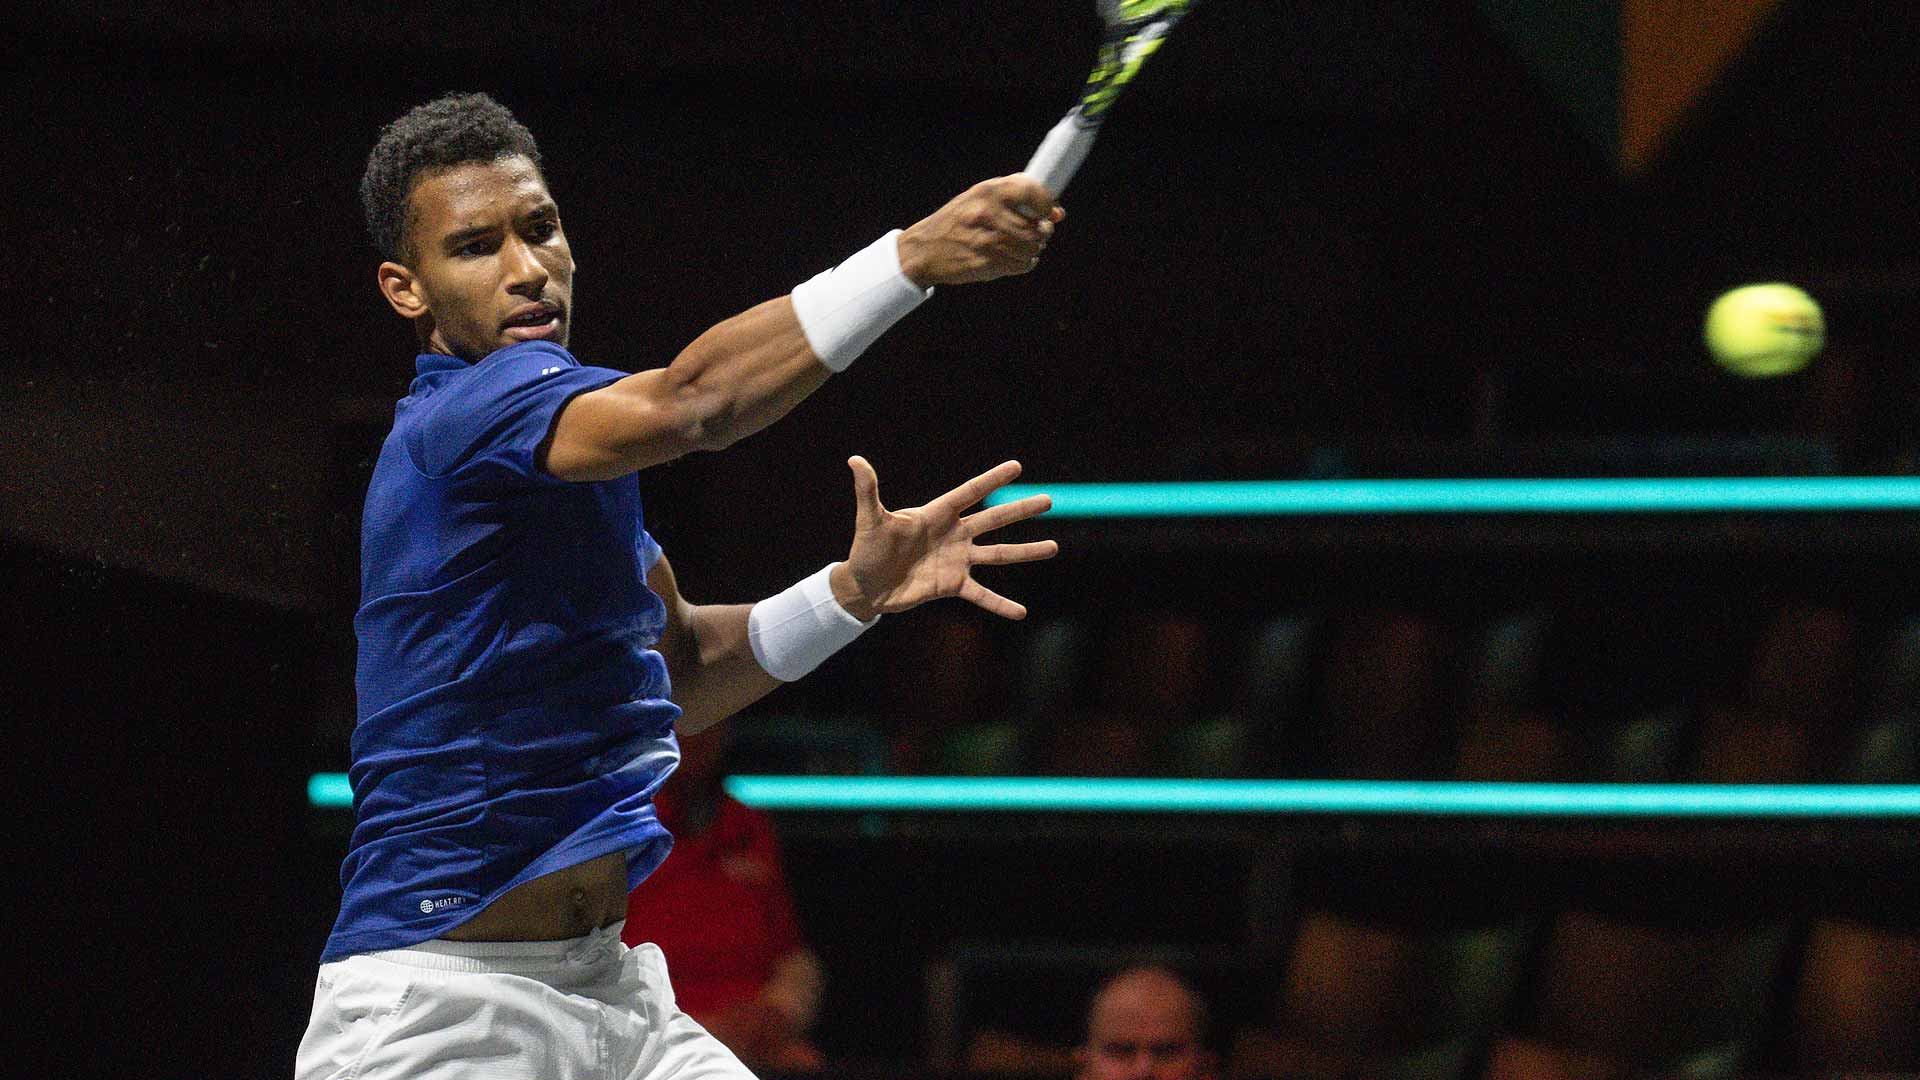 Felix Auger-Aliassime defeats Lorenzo Sonego in straight sets on Tuesday to reach the second round in Rotterdam.